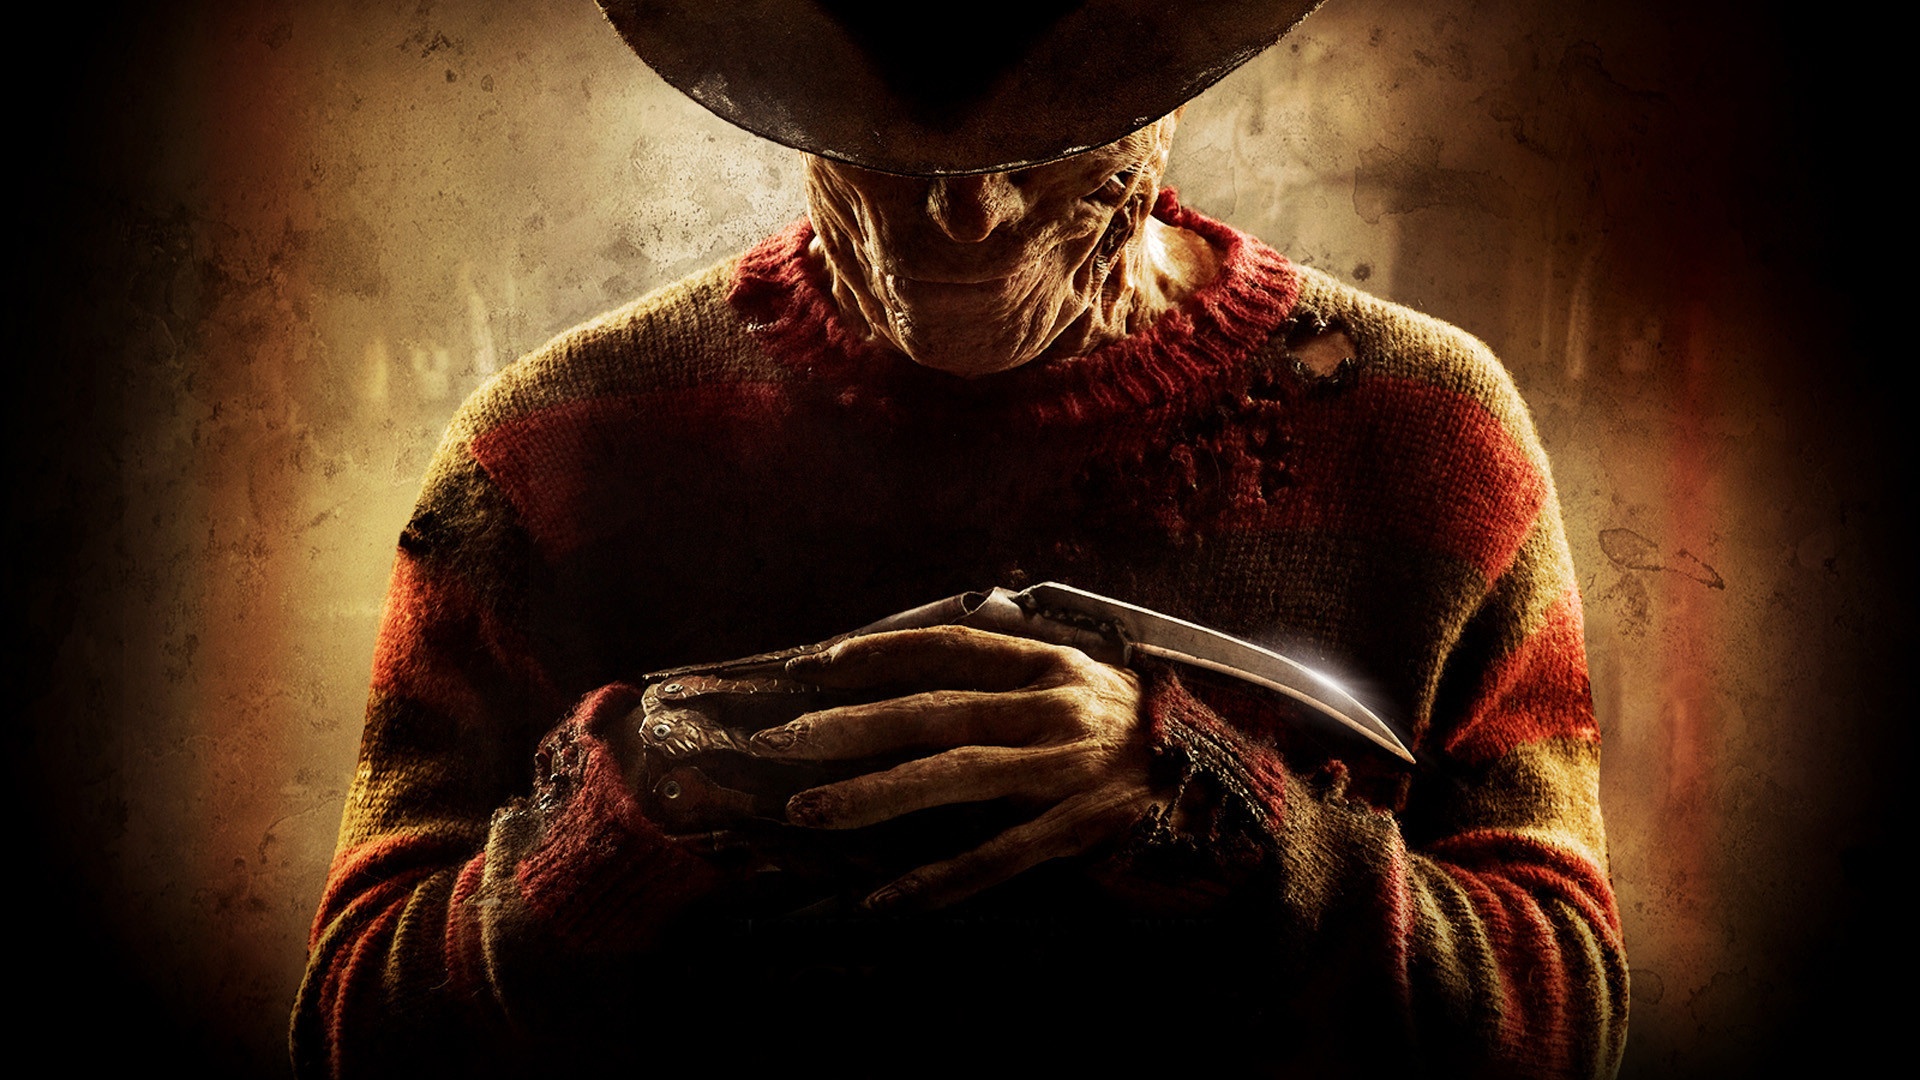 Popular A Nightmare On Elm Street Image for Phone